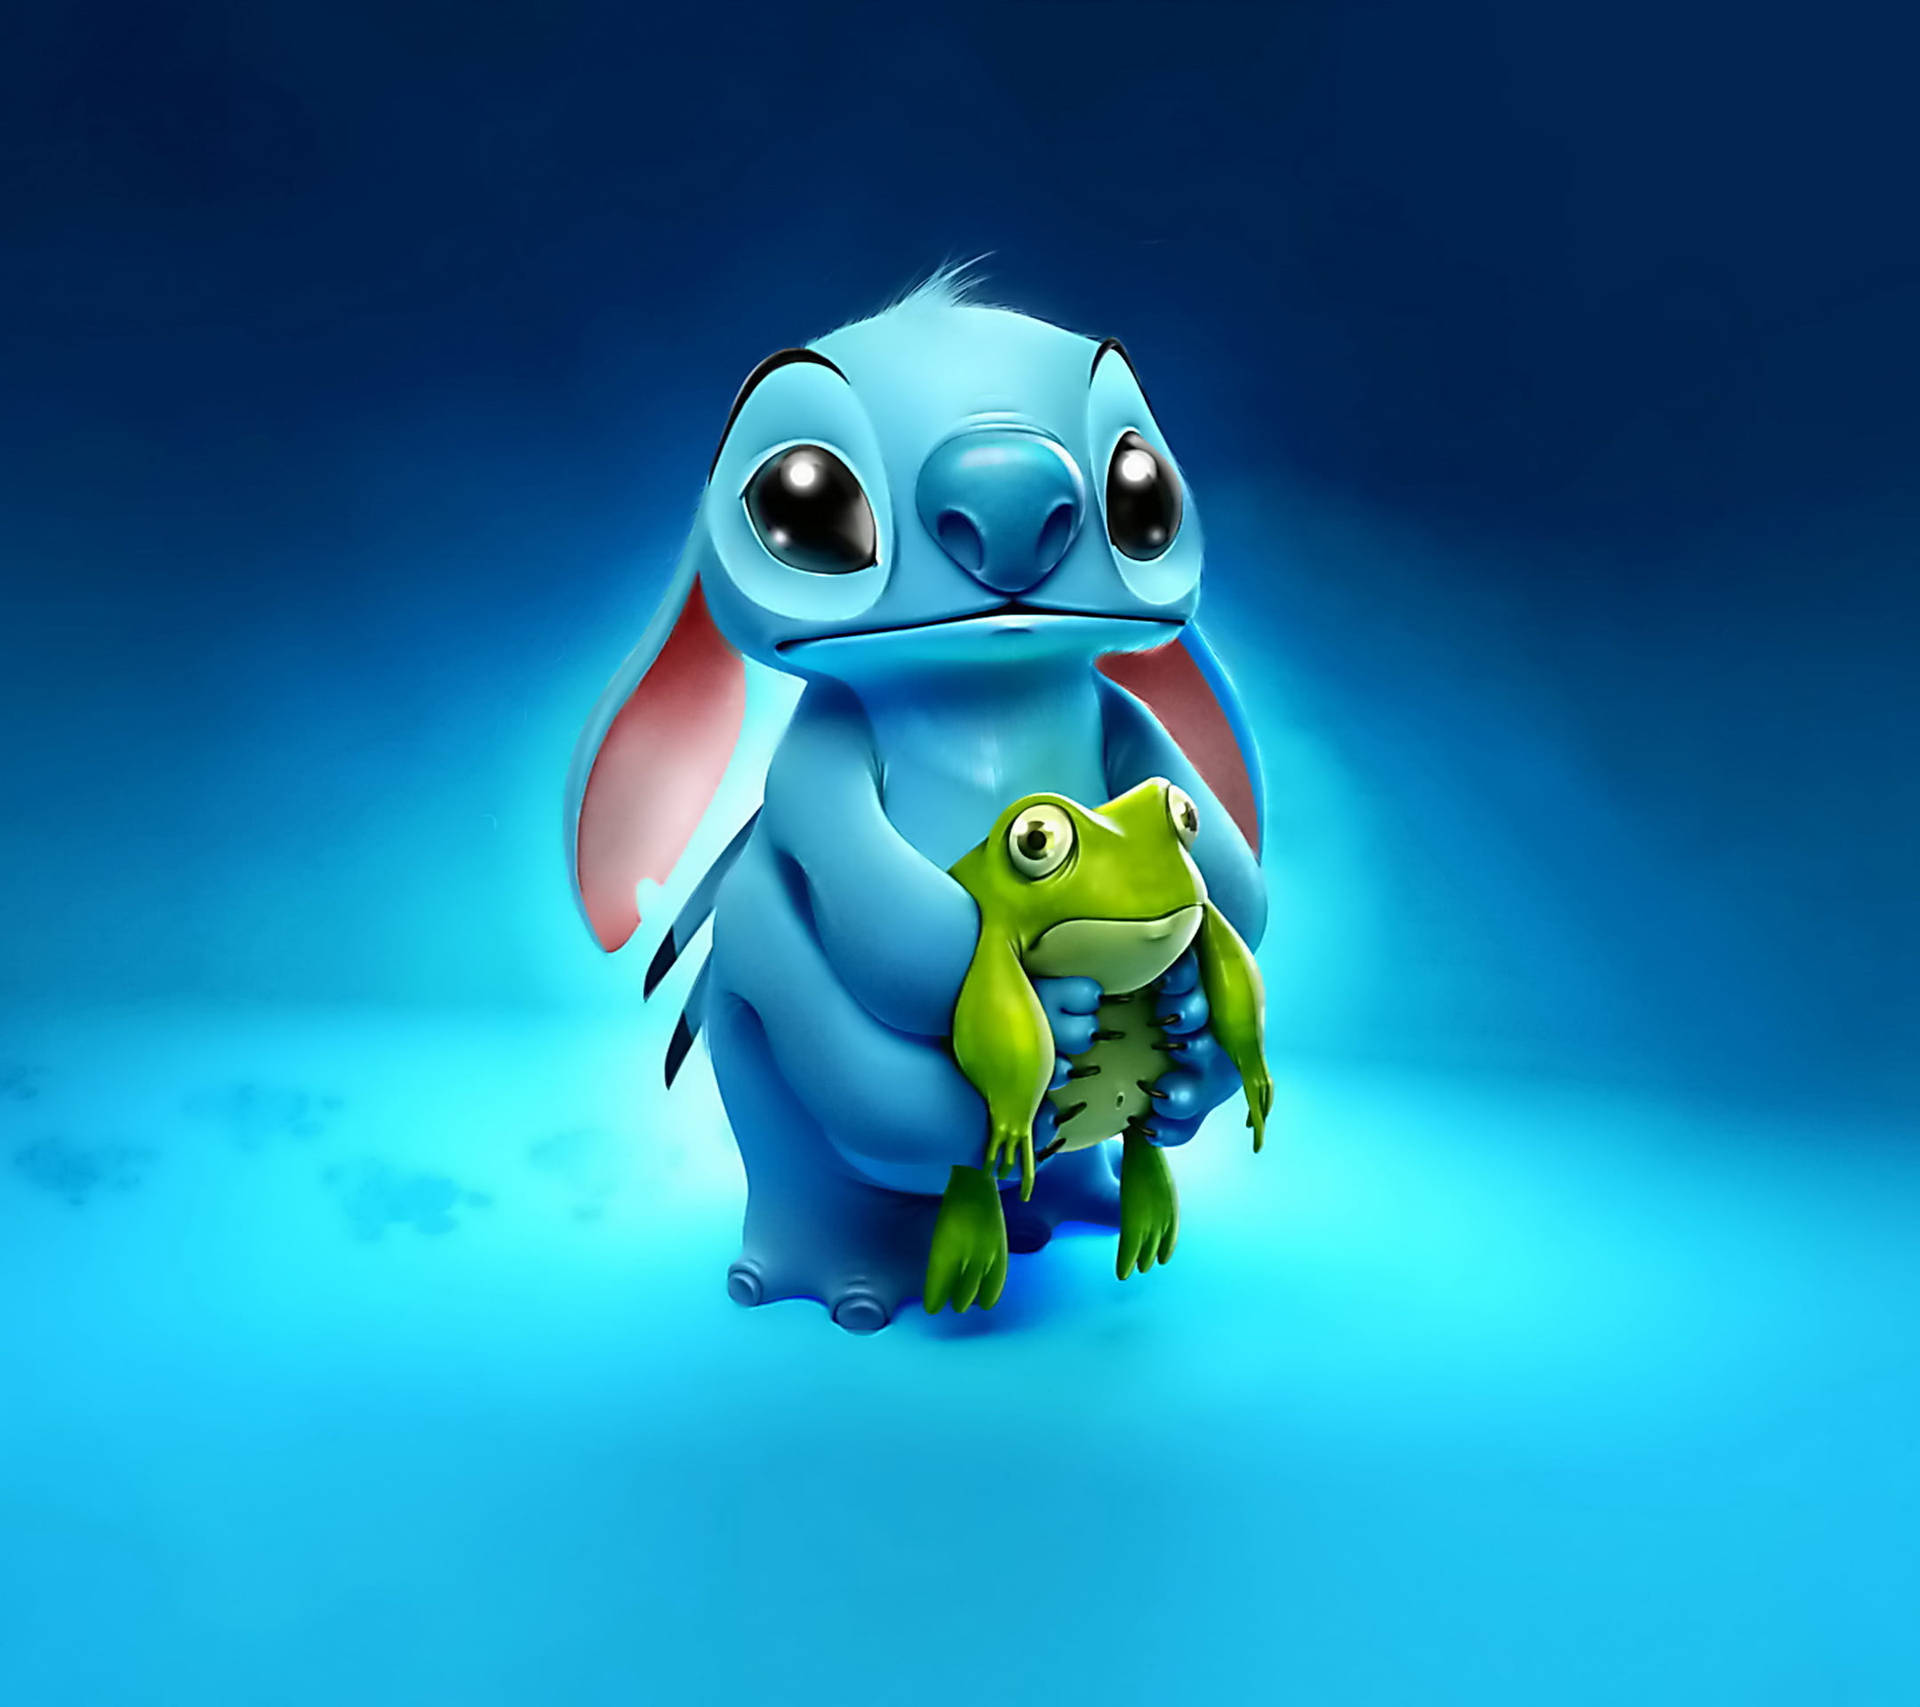 Cute Disney Stitch With Frog Background